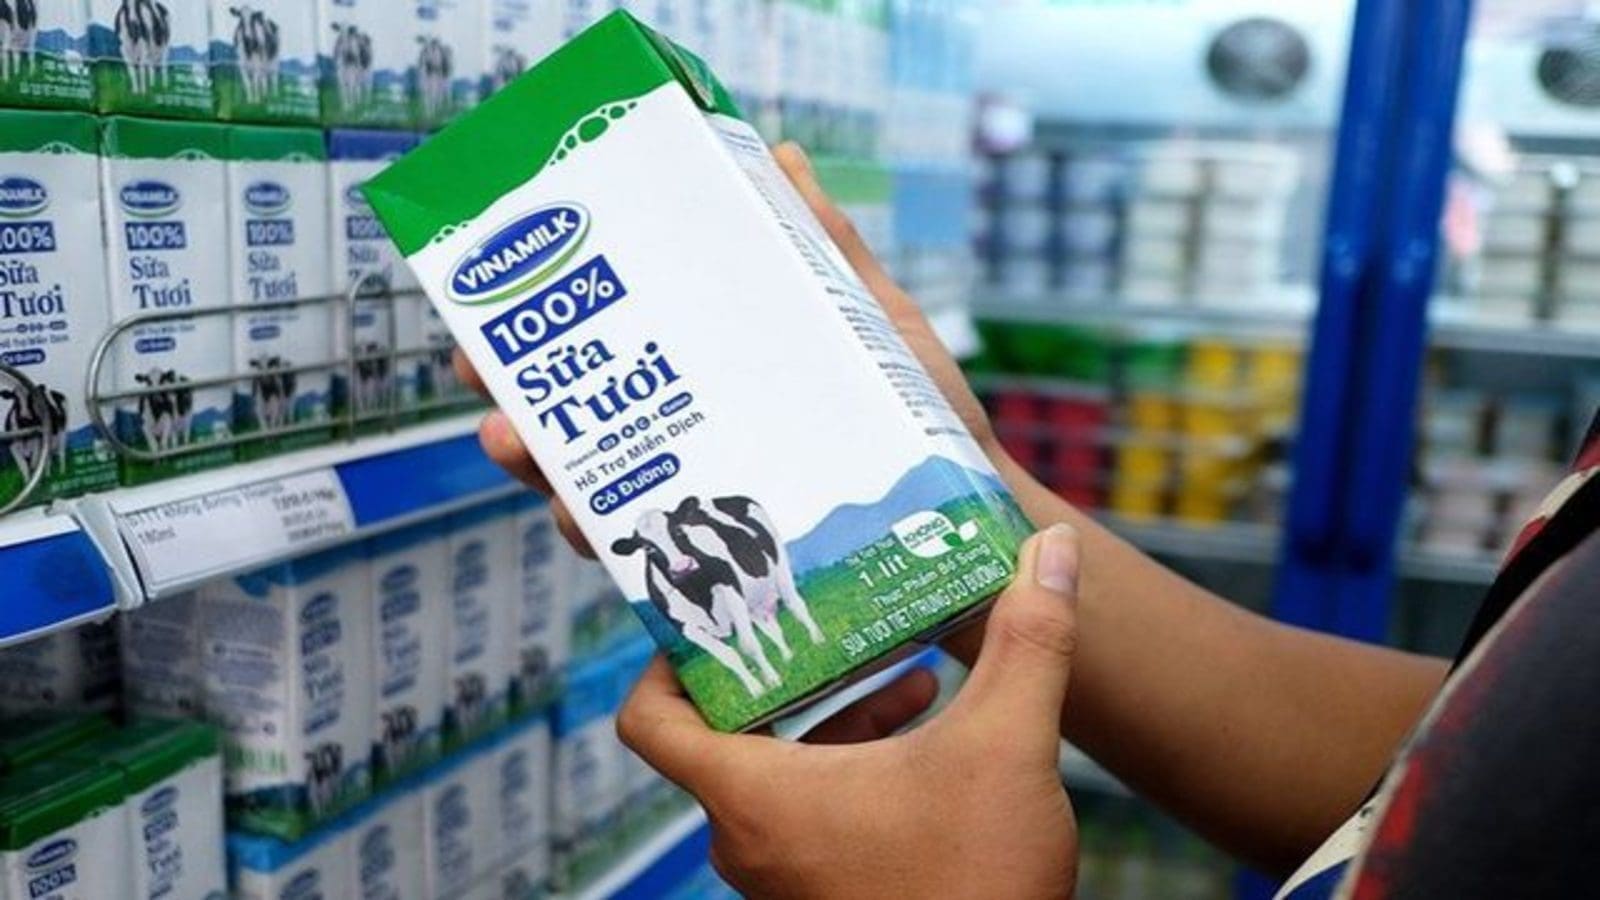 Vietnam dairy brand Vinamilk to launch in Philippines following partnership with Del Monte